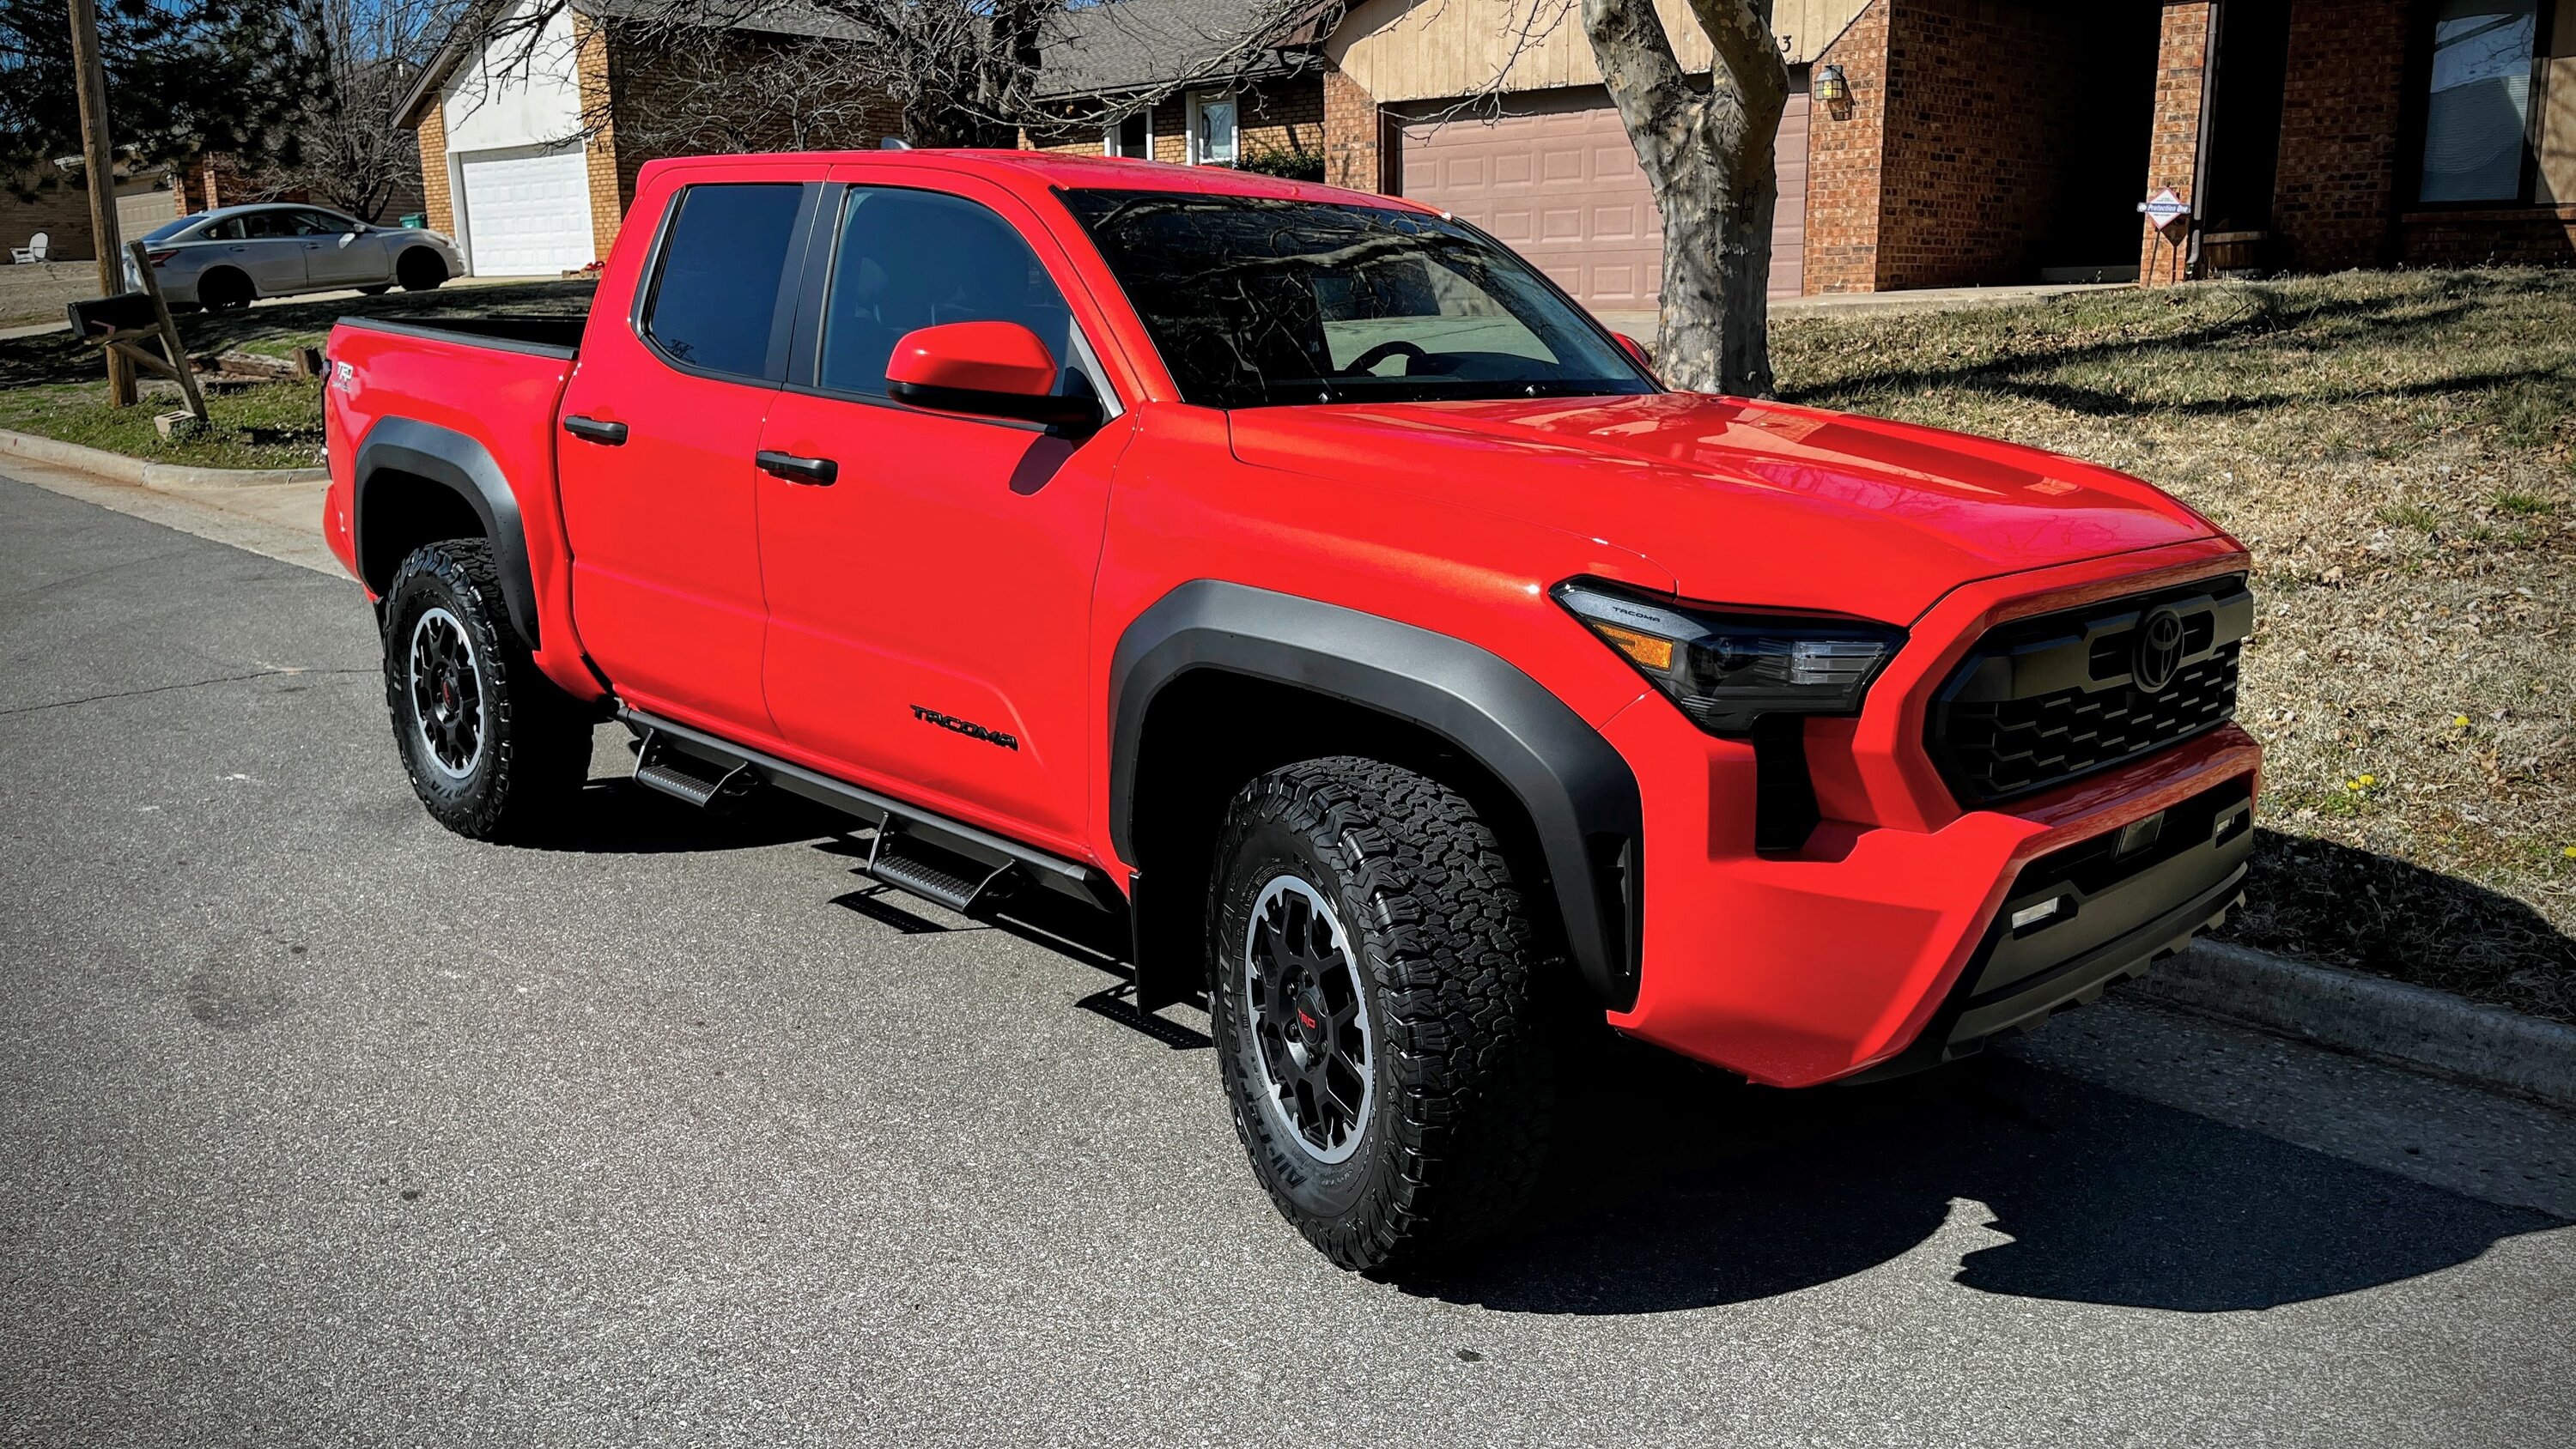 2024 Tacoma 285/70/17 tires (BFG All-Terrain T/A) on stock wheels, no poke, no trim, no cab mount removal (2024 TRD Off-Road) 285-70-17 tires stock factory wheels 2024 Tacoma TRD Off-Road  1